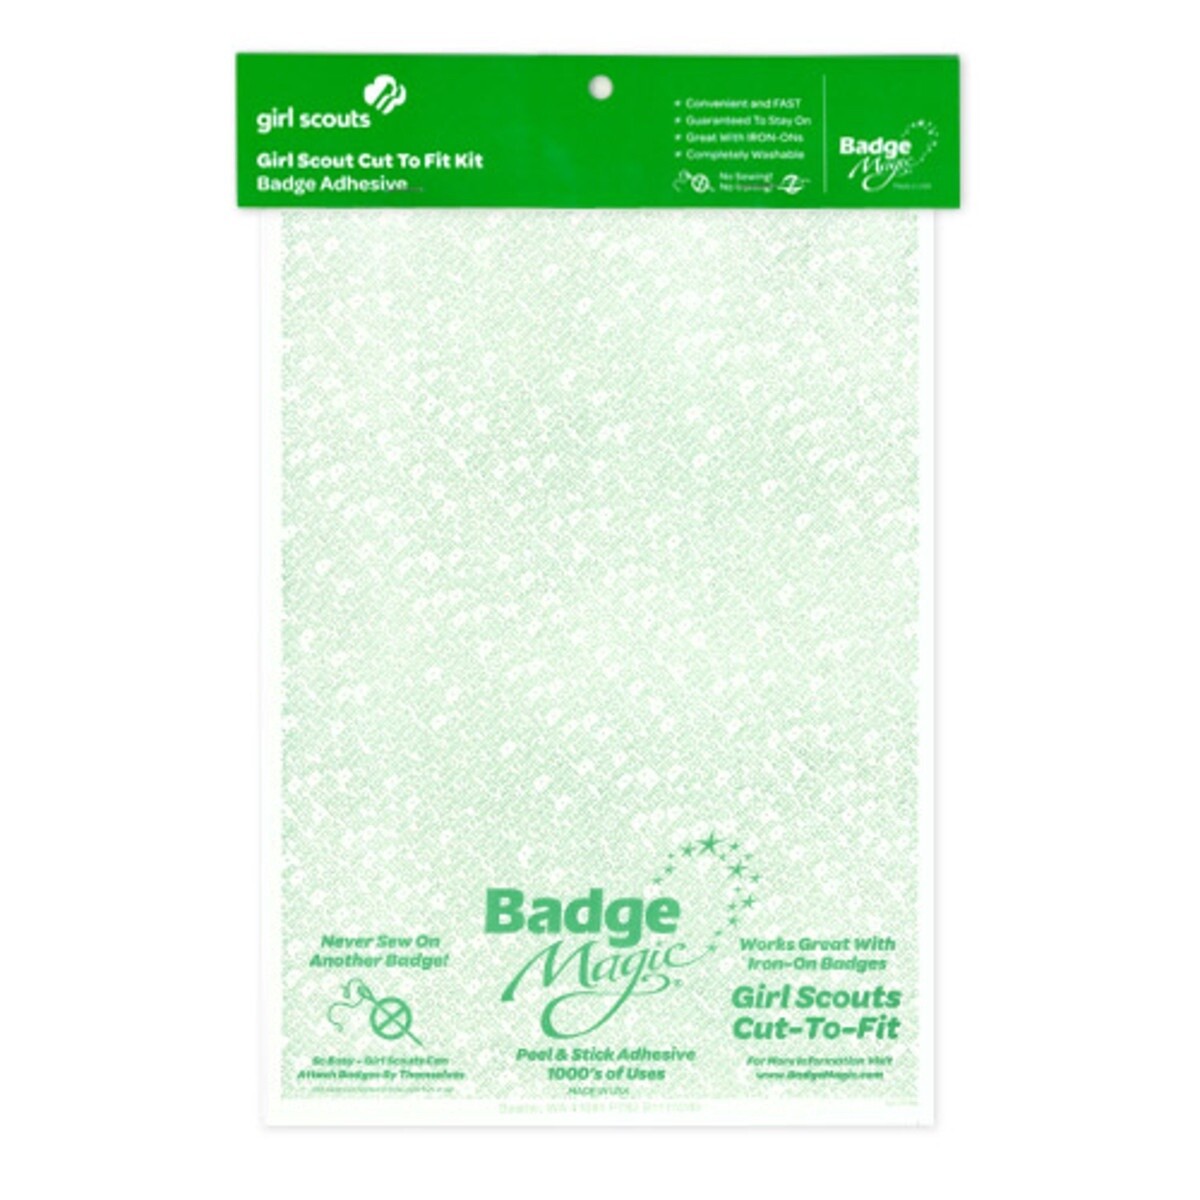 Badge Magic Girl Scout Cut-To-Fit Kit